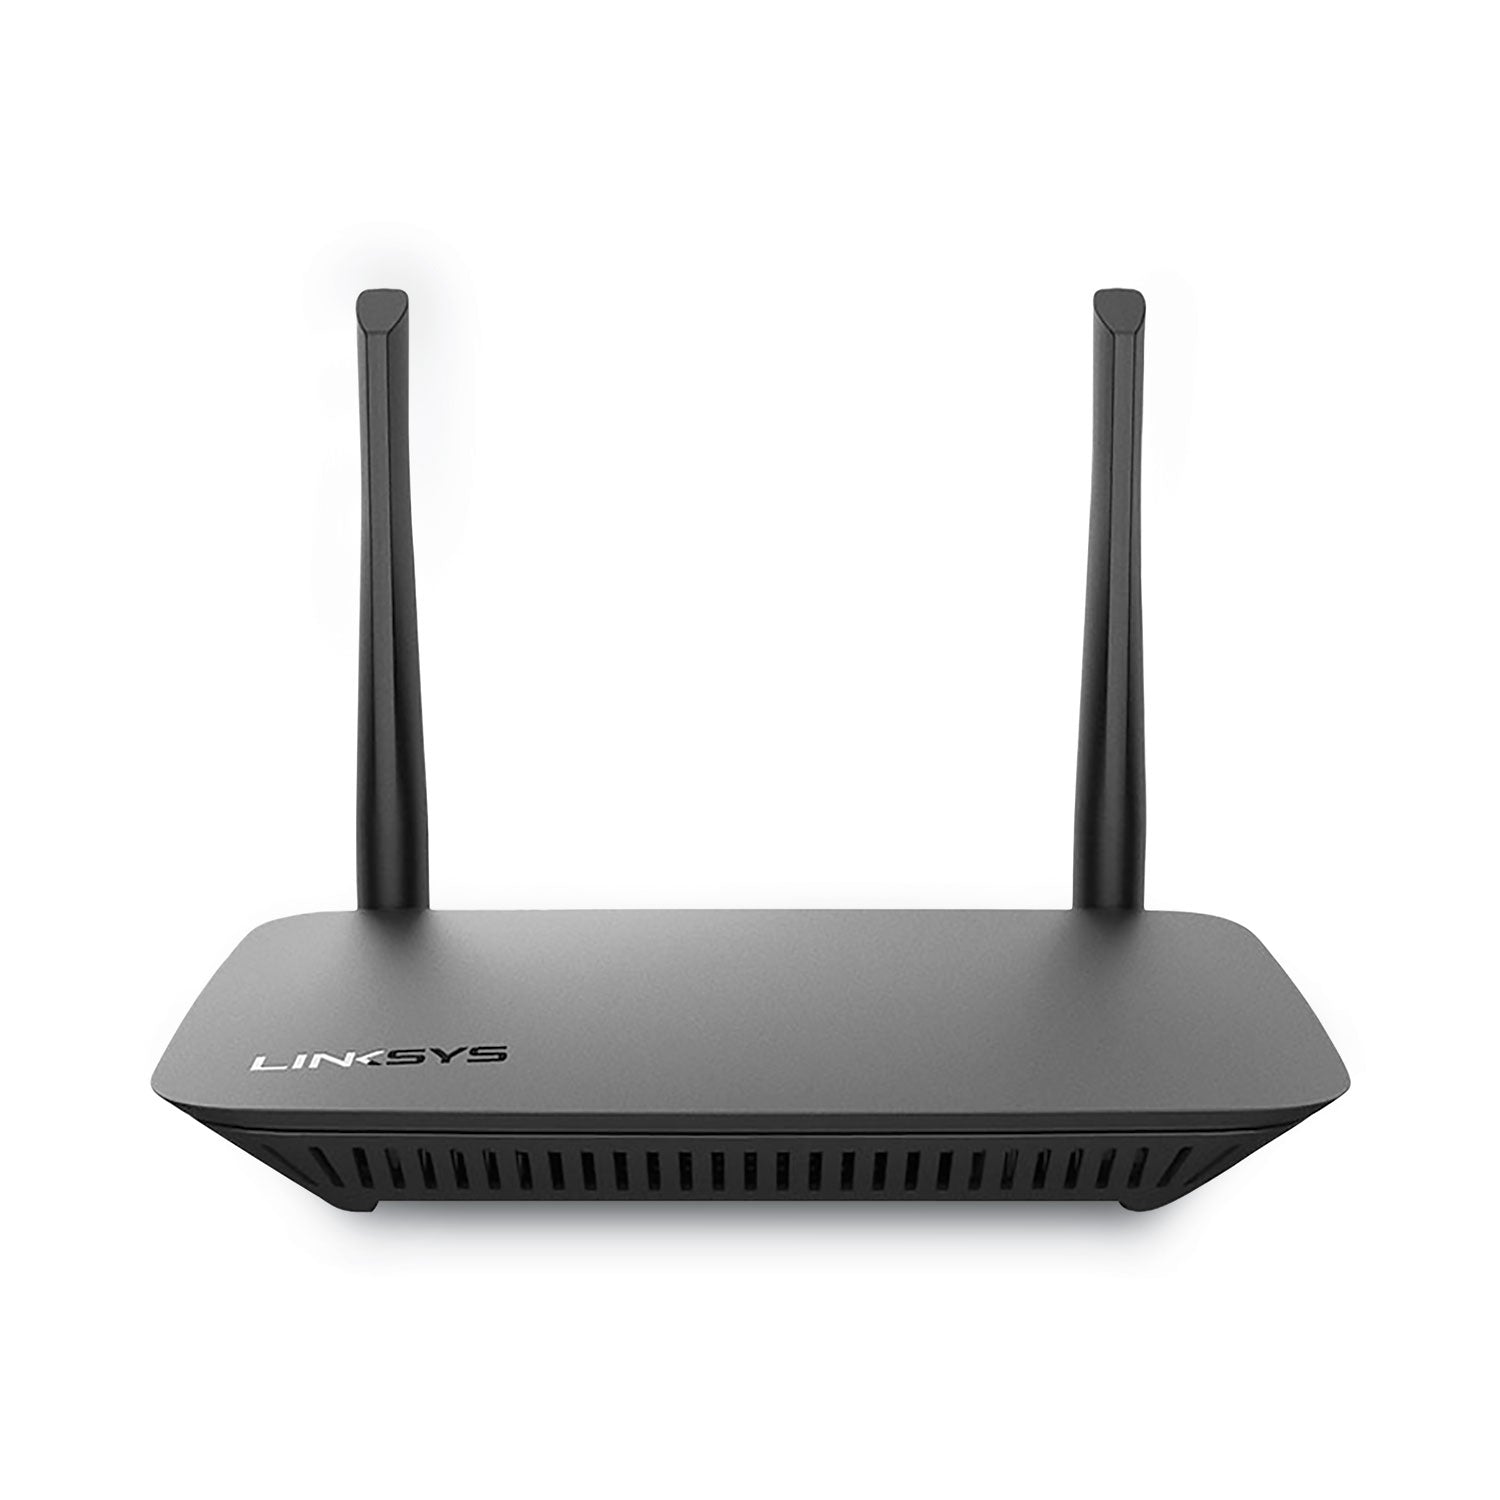 ac1000-wi-fi-router-5-ports-dual-band-24-ghz-5-ghz_lnke5350 - 1